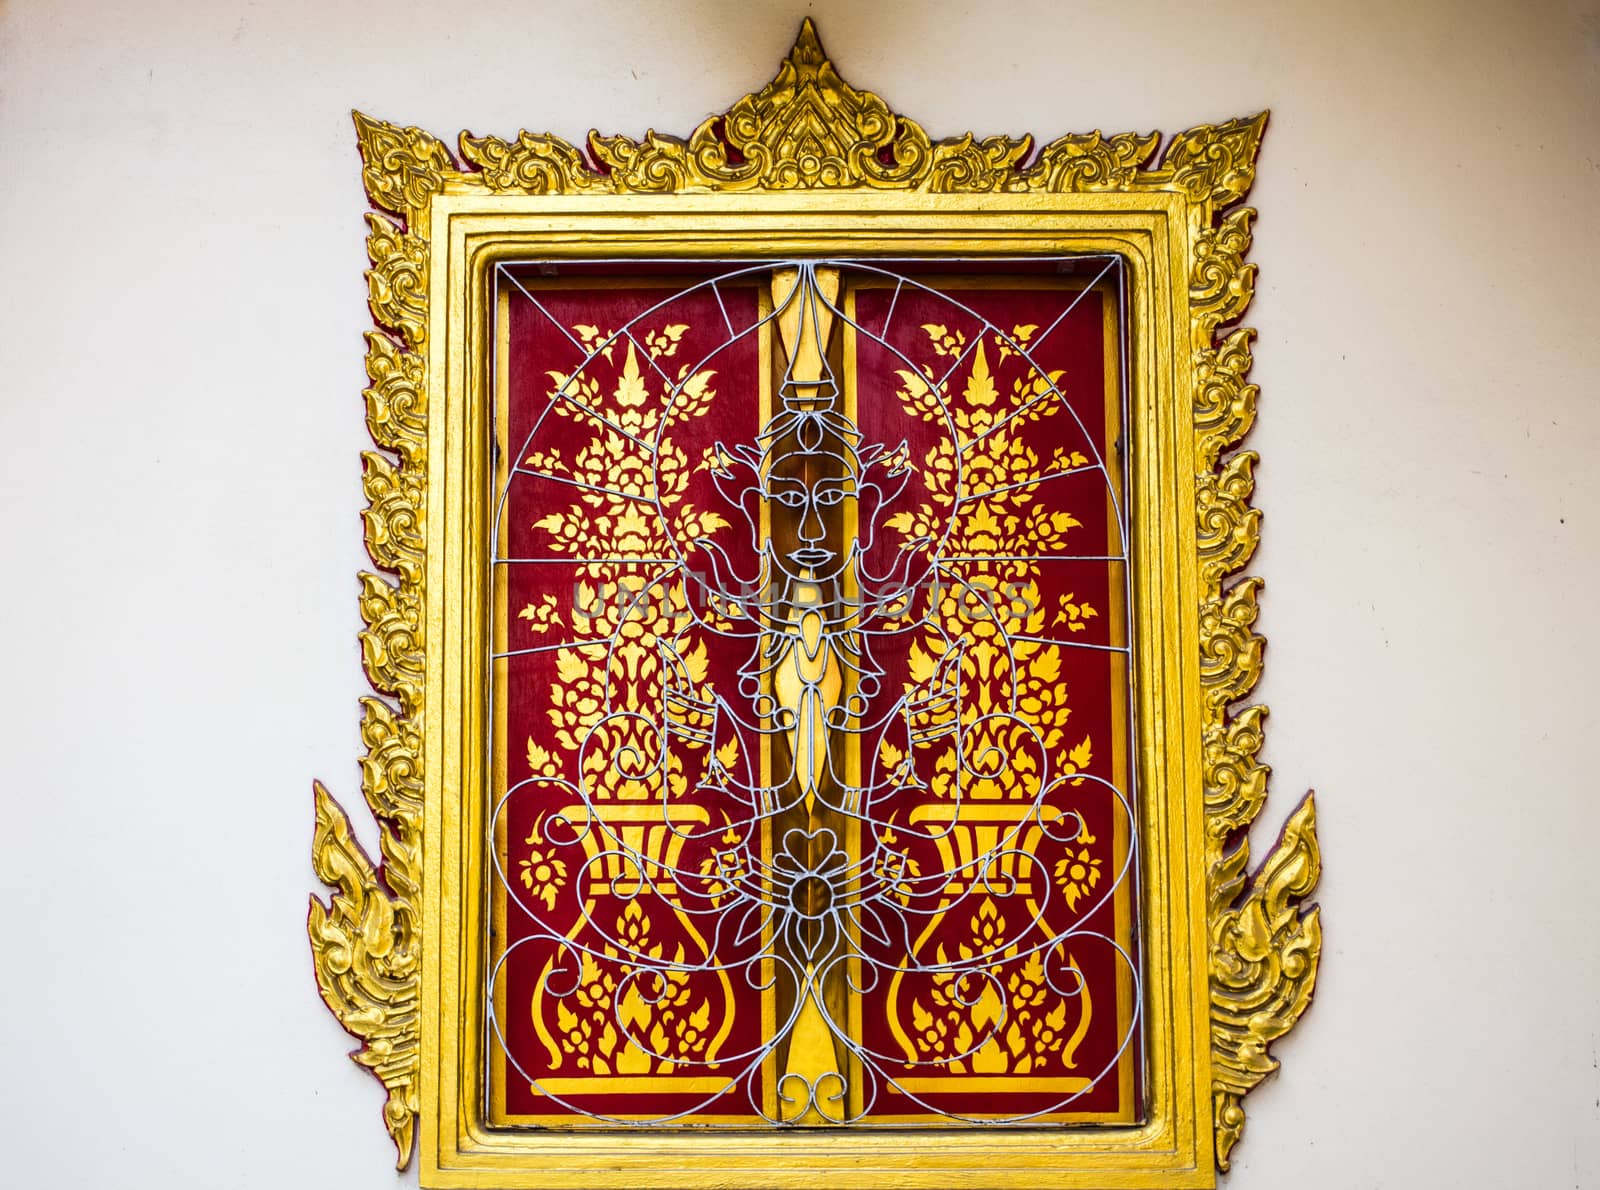 Art of windows in thai temple by golengstock